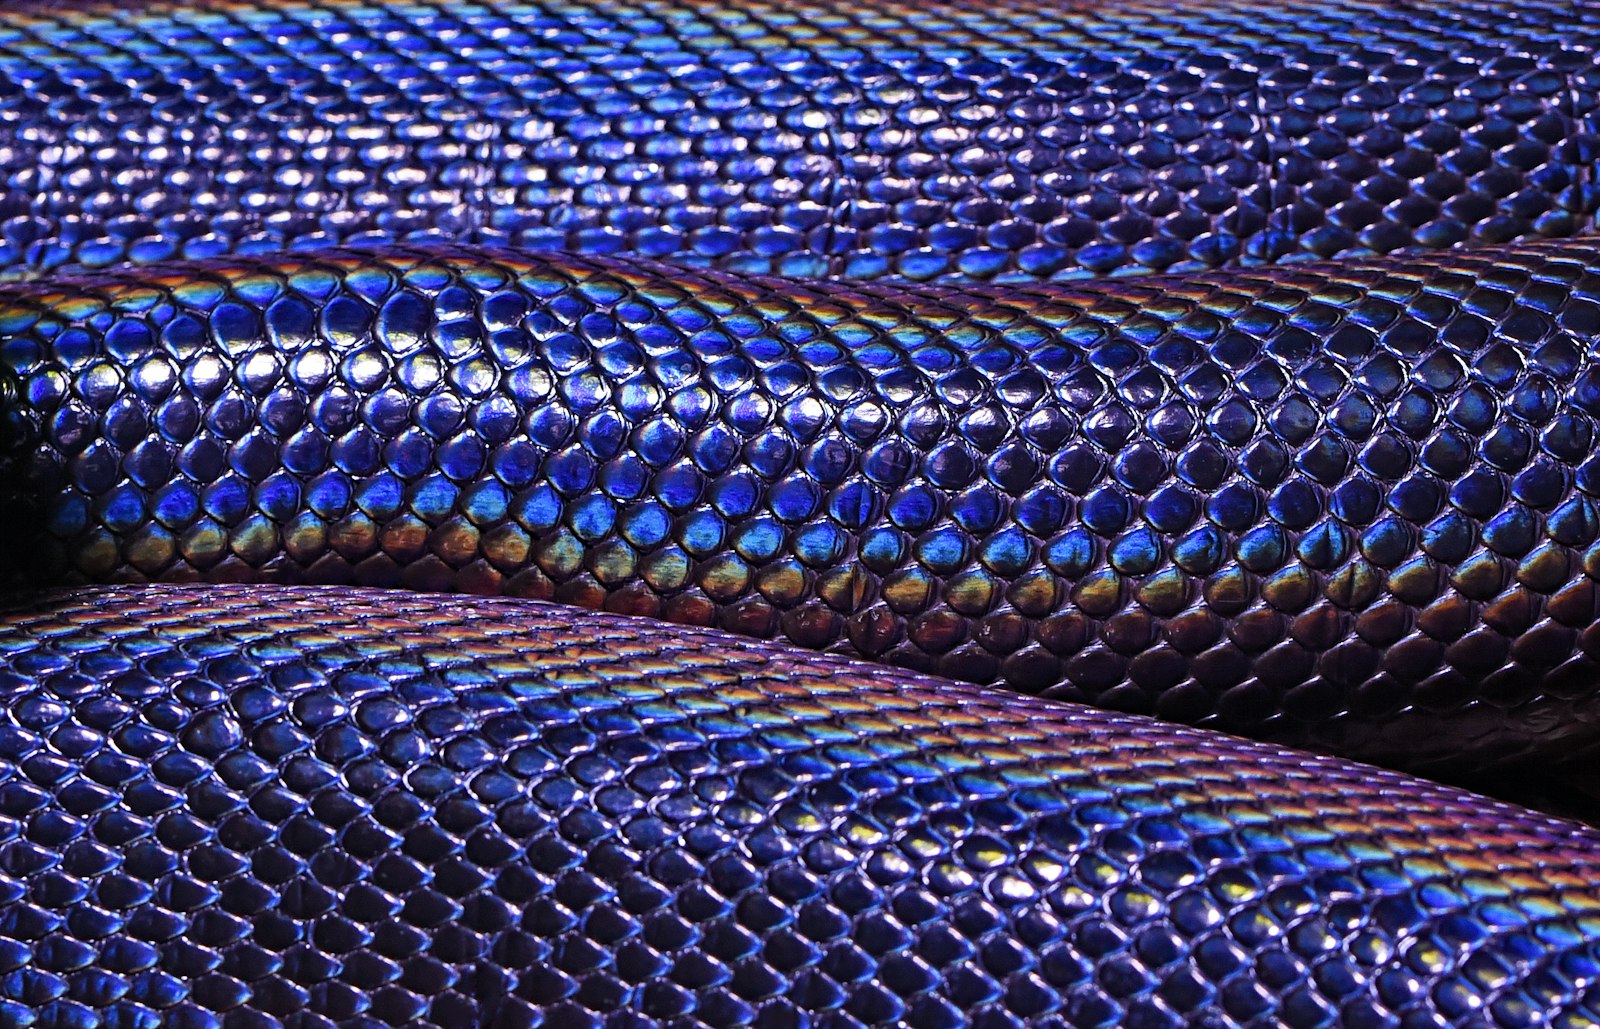 Tamron SP 90mm F2.8 Di VC USD 1:1 Macro (F004) sample photo. Blue and purple snakeskin photography